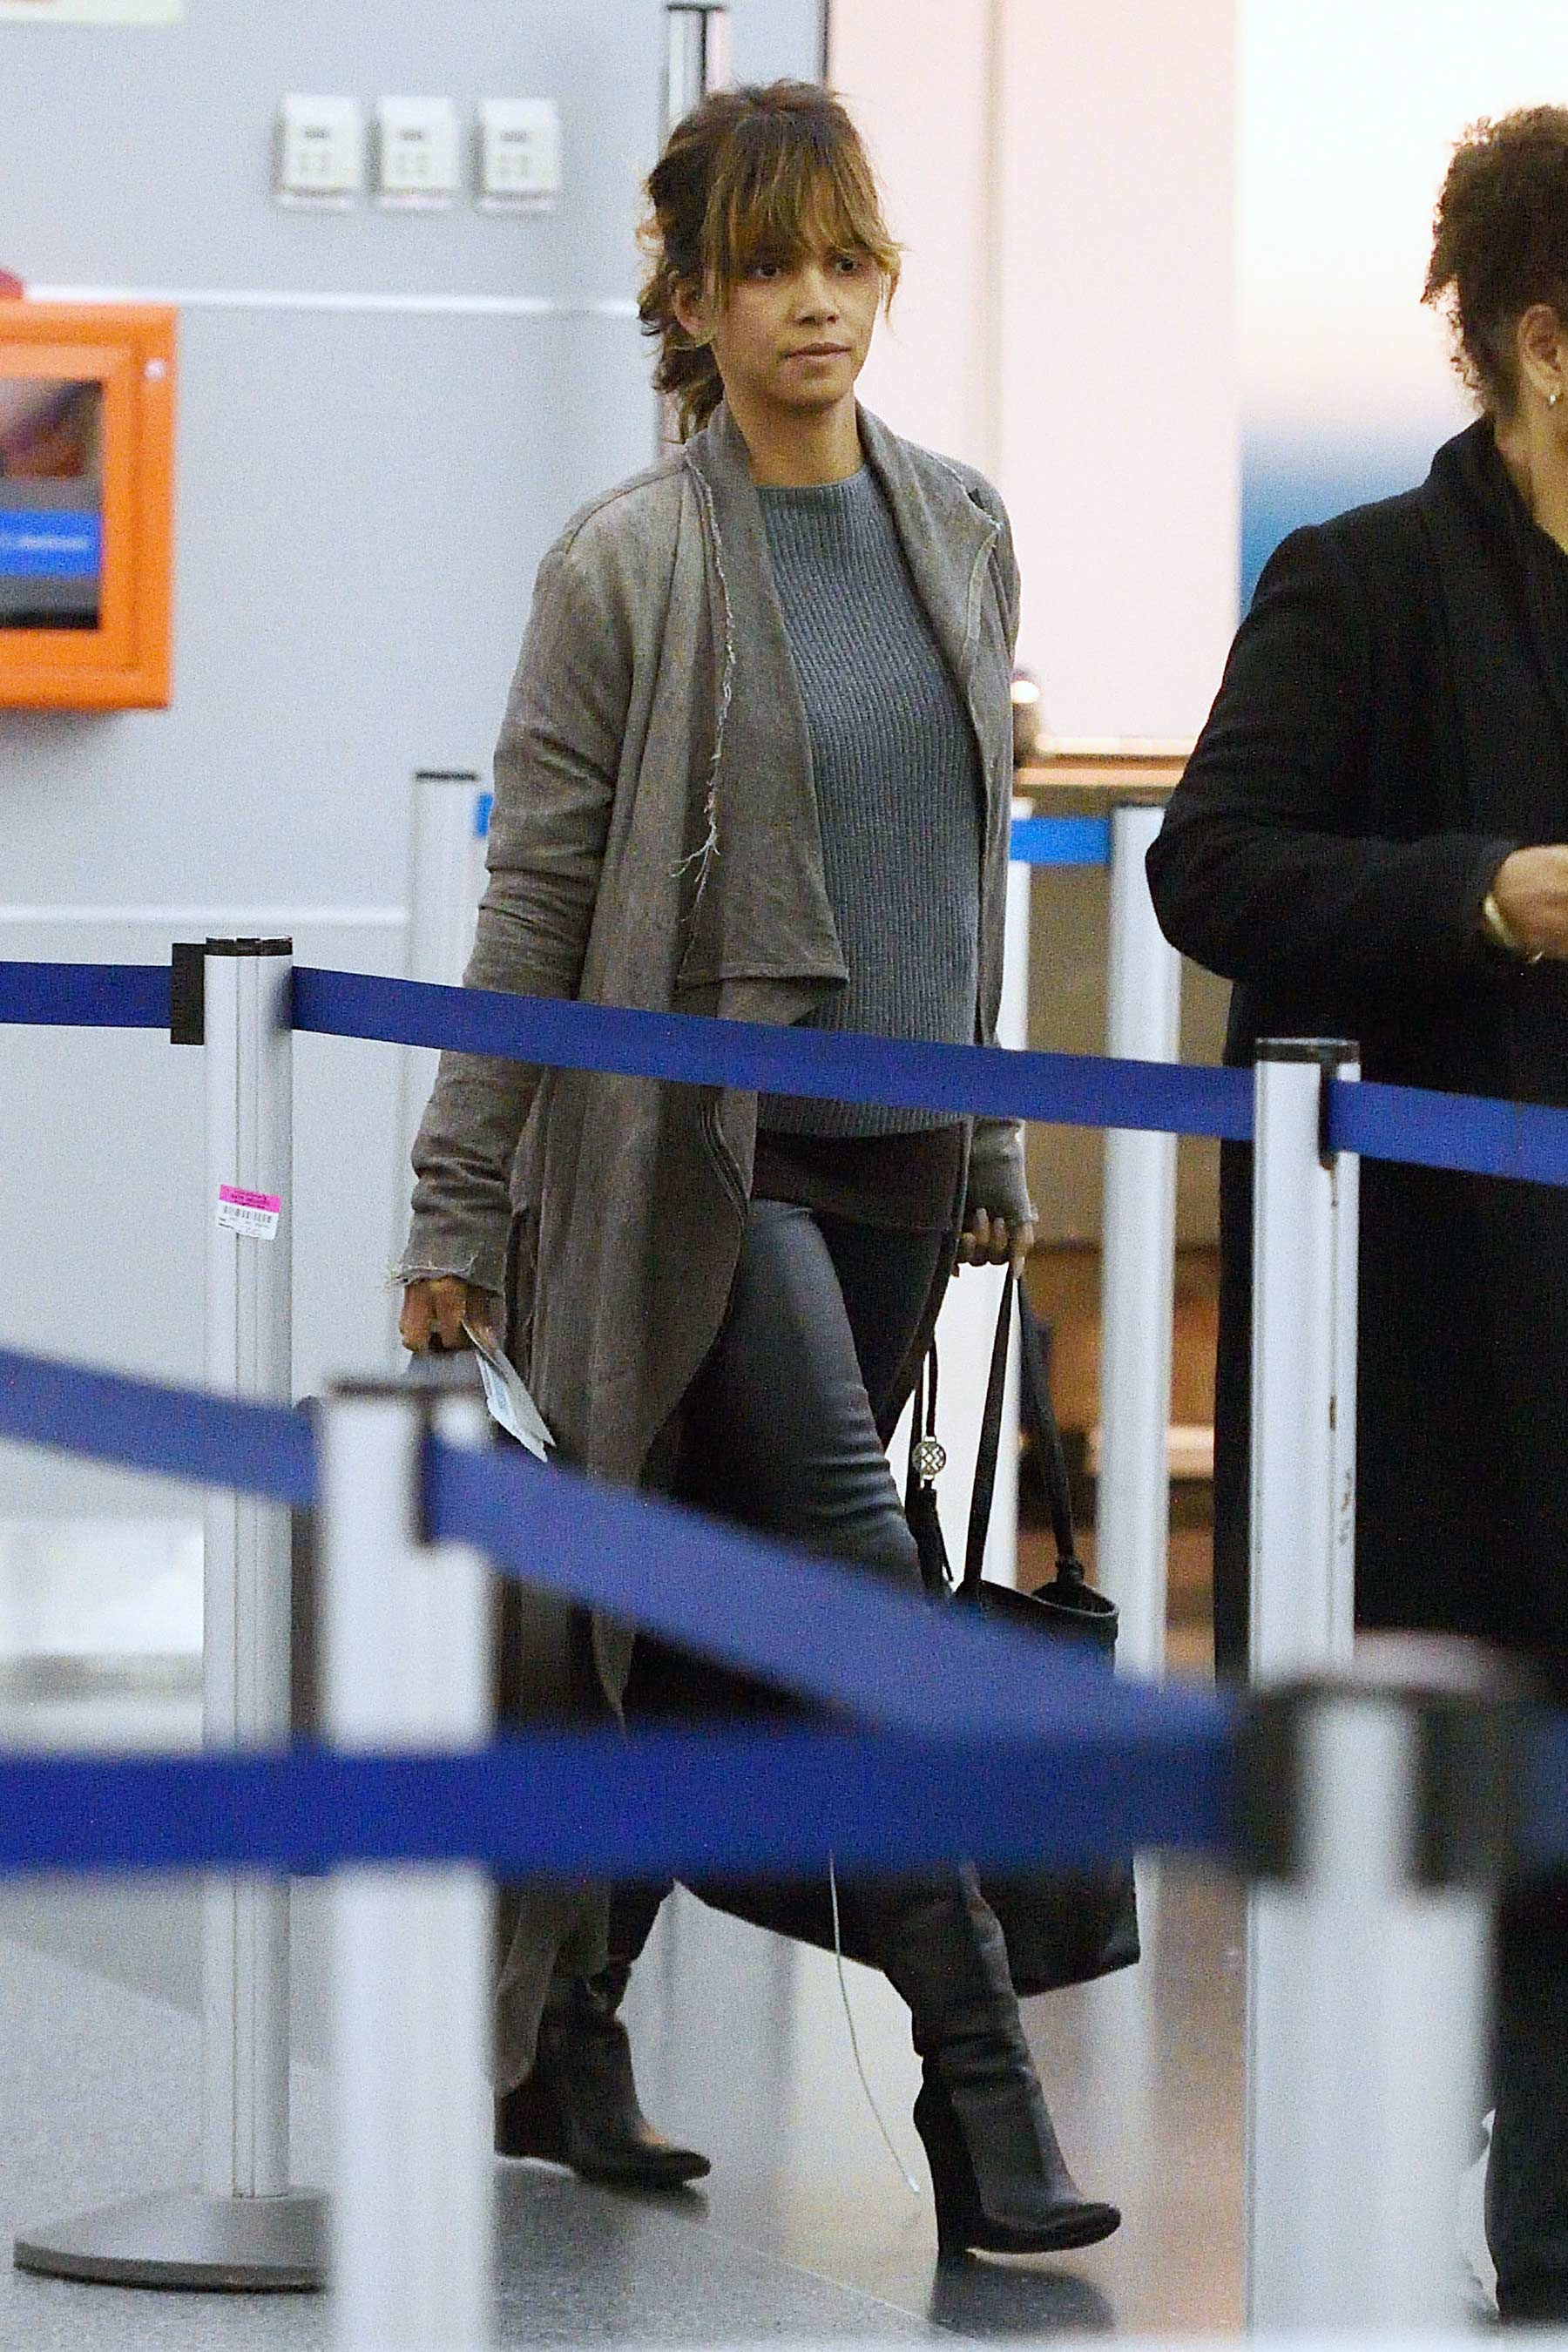 Halle Berry arrives to catch a flight at JFK airport